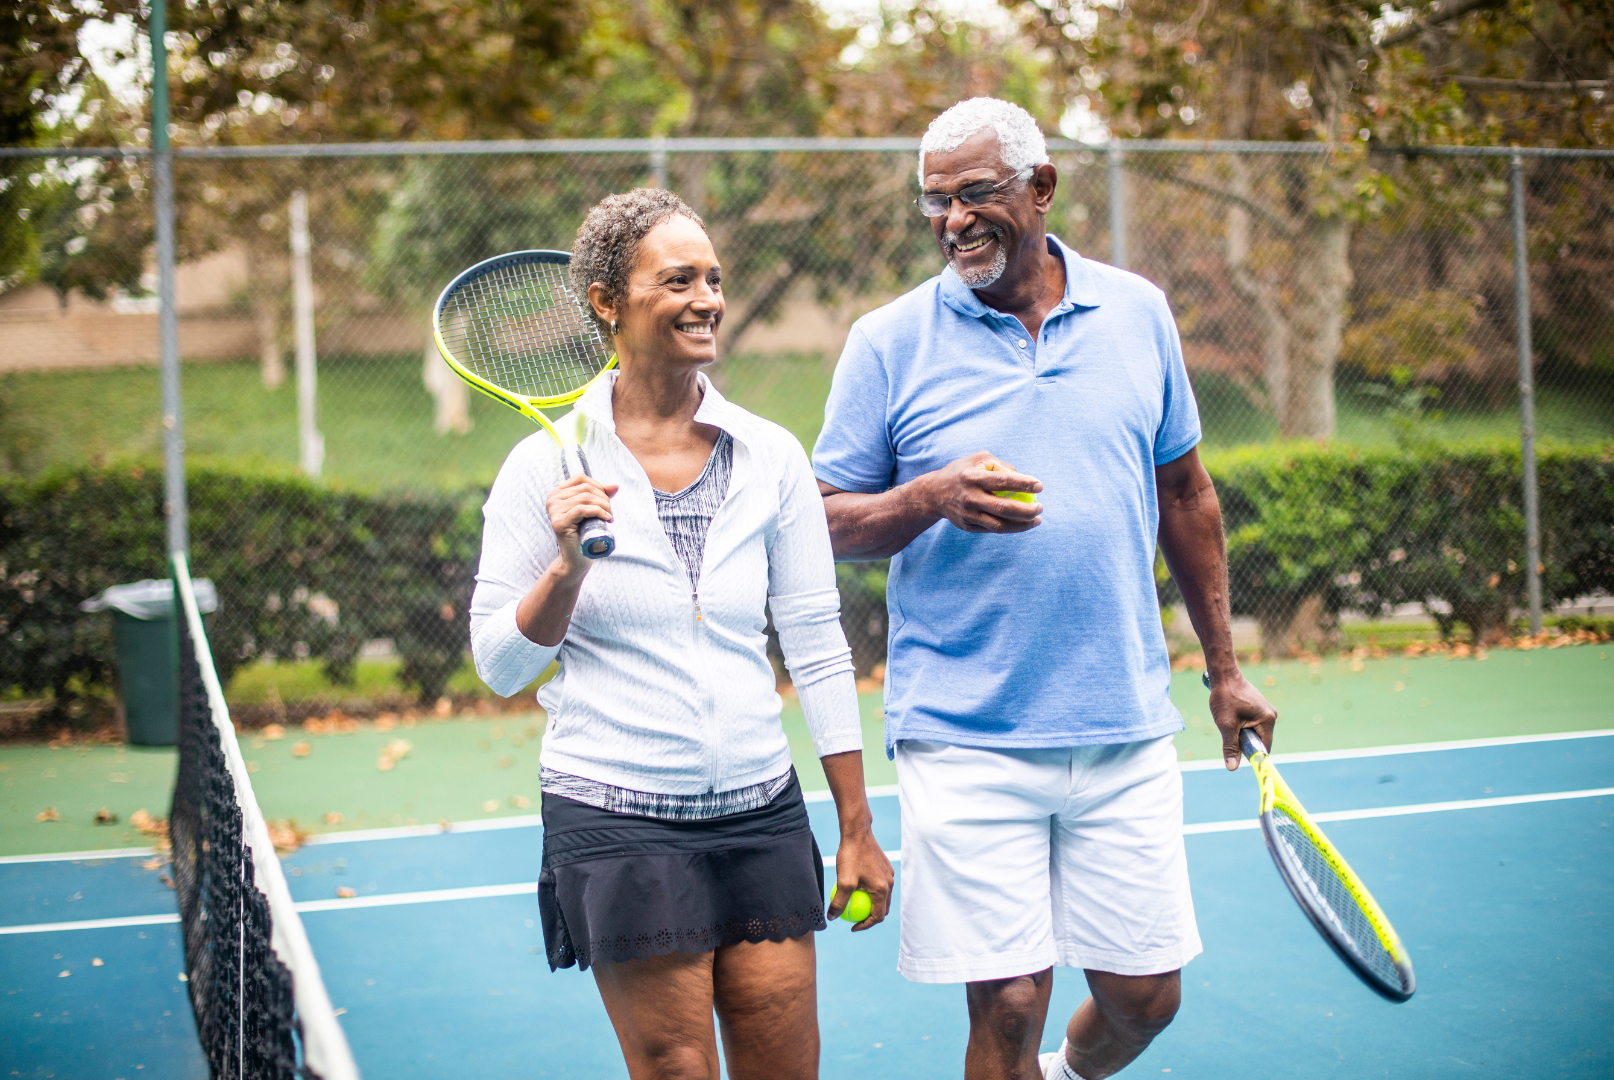 A man and woman playing tennis